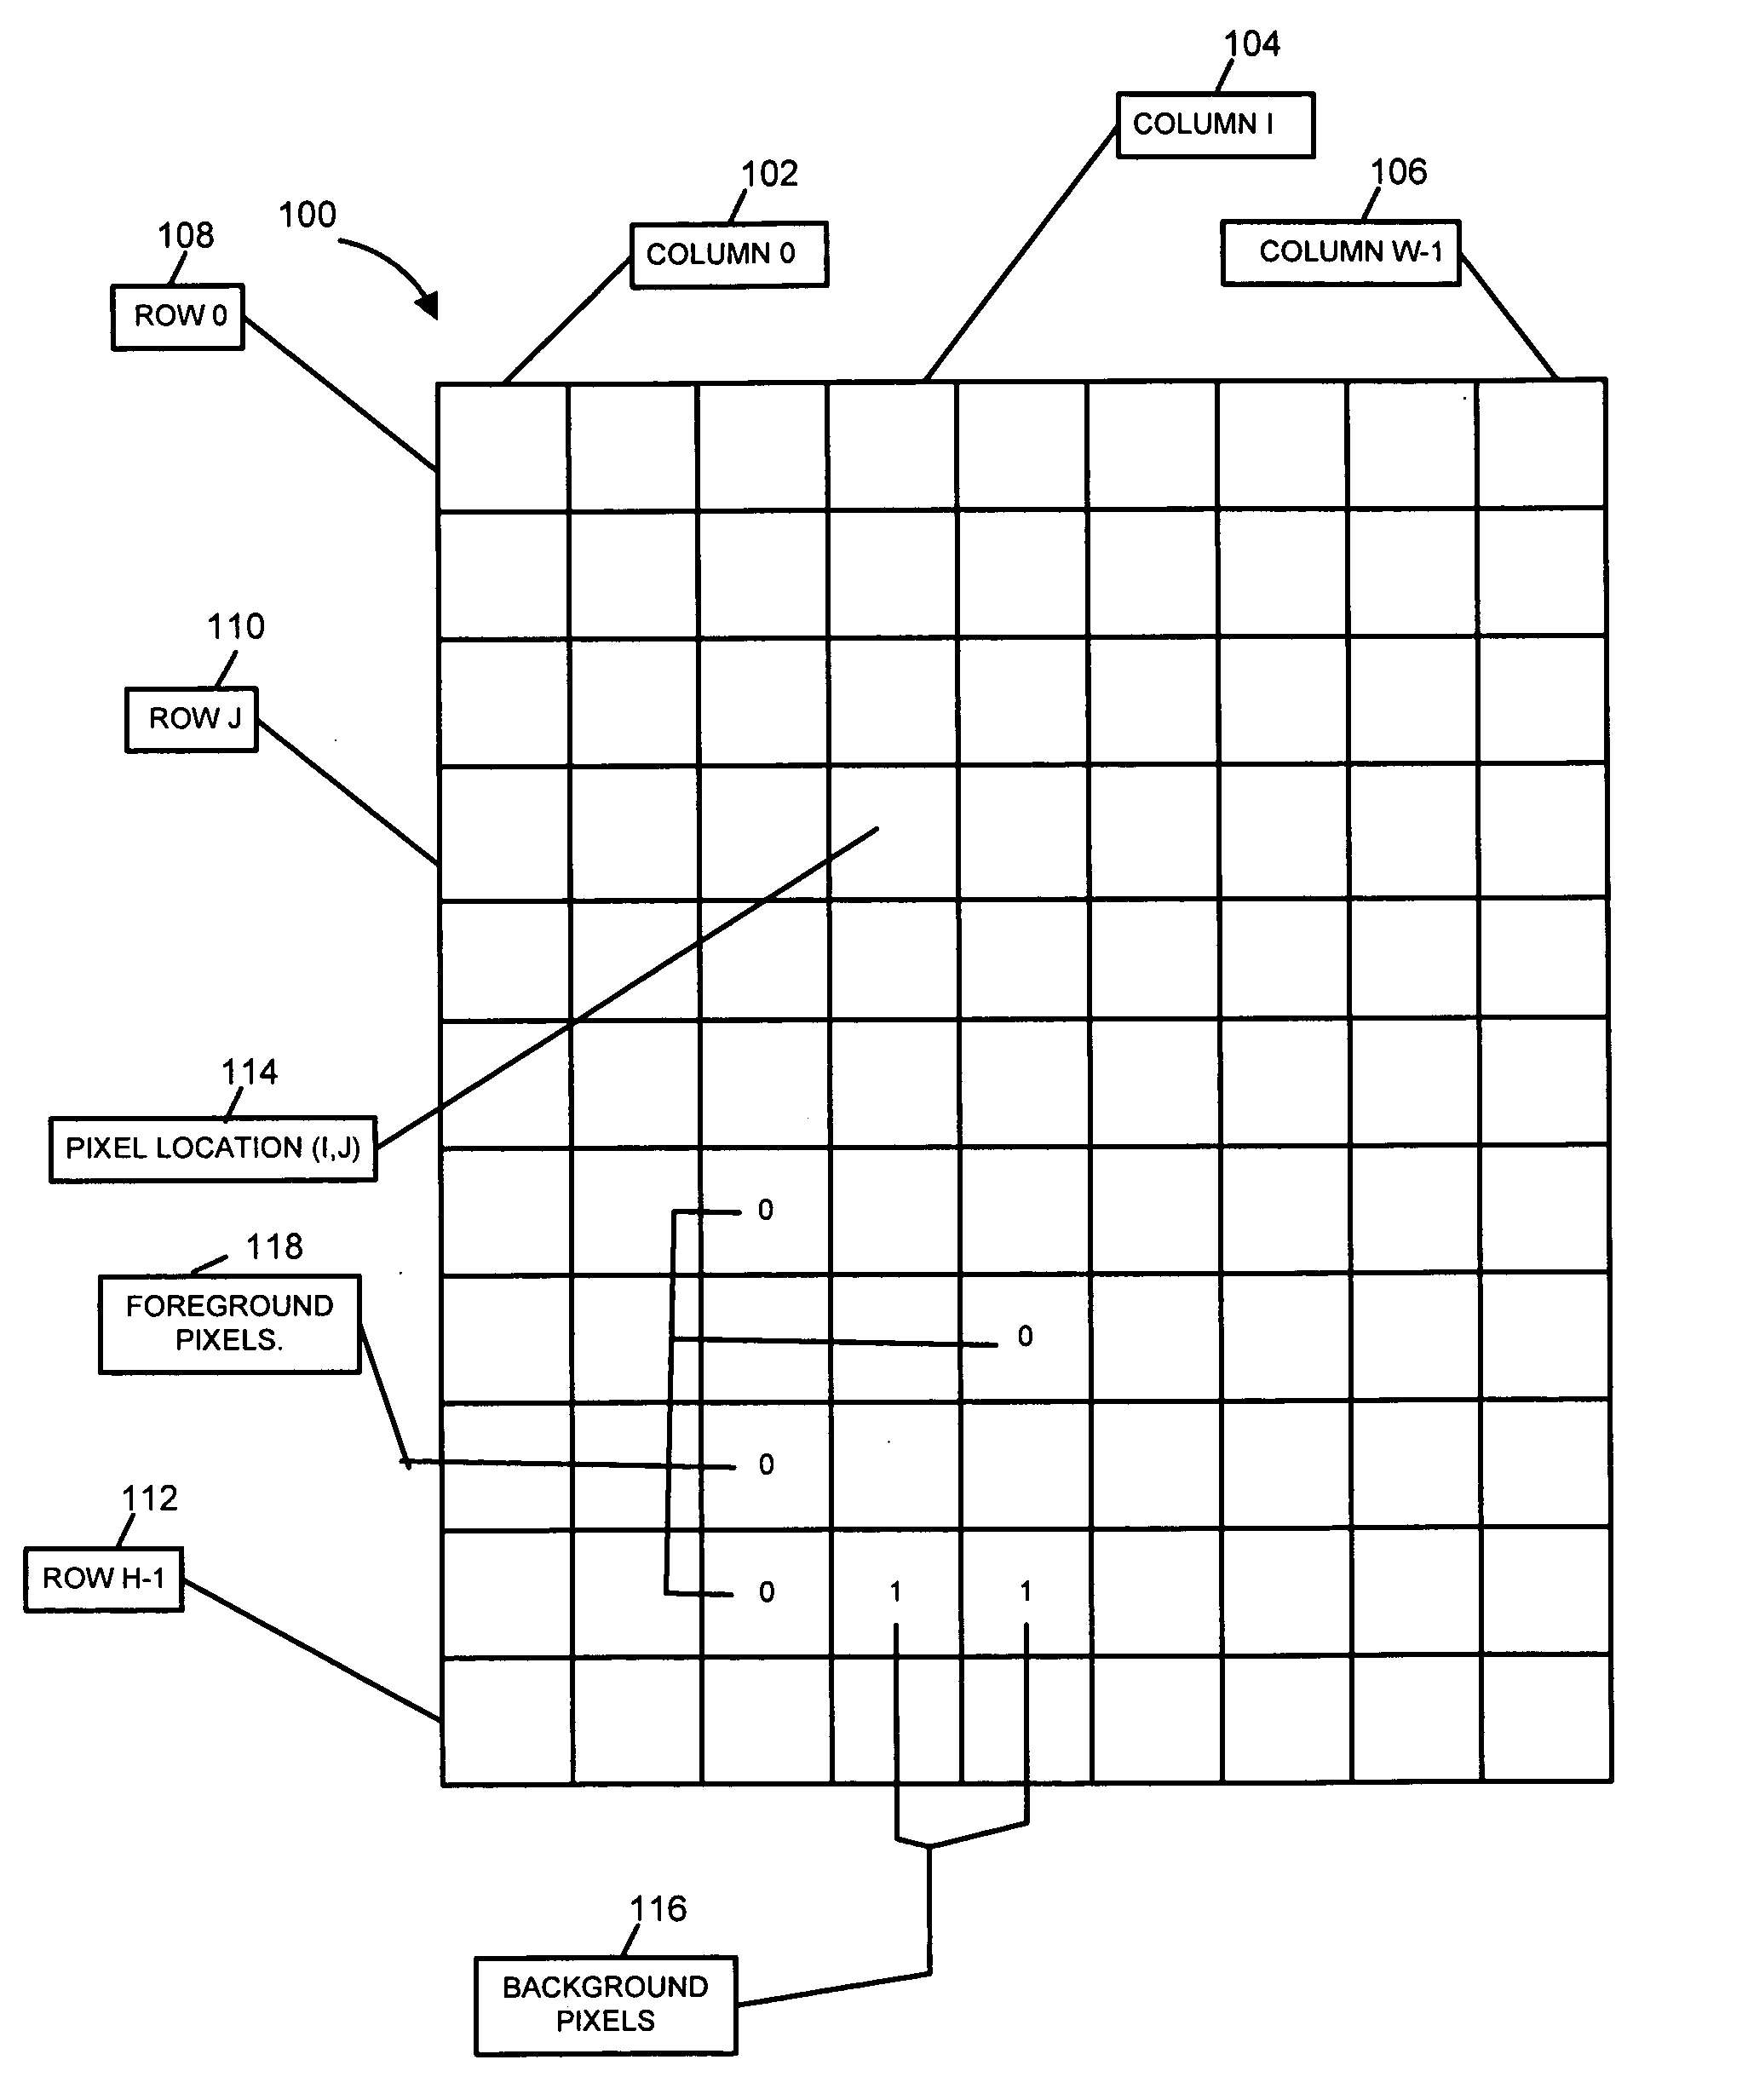 Method and apparatus for identifying the rotation angle and bounding rectangle of a digitized form